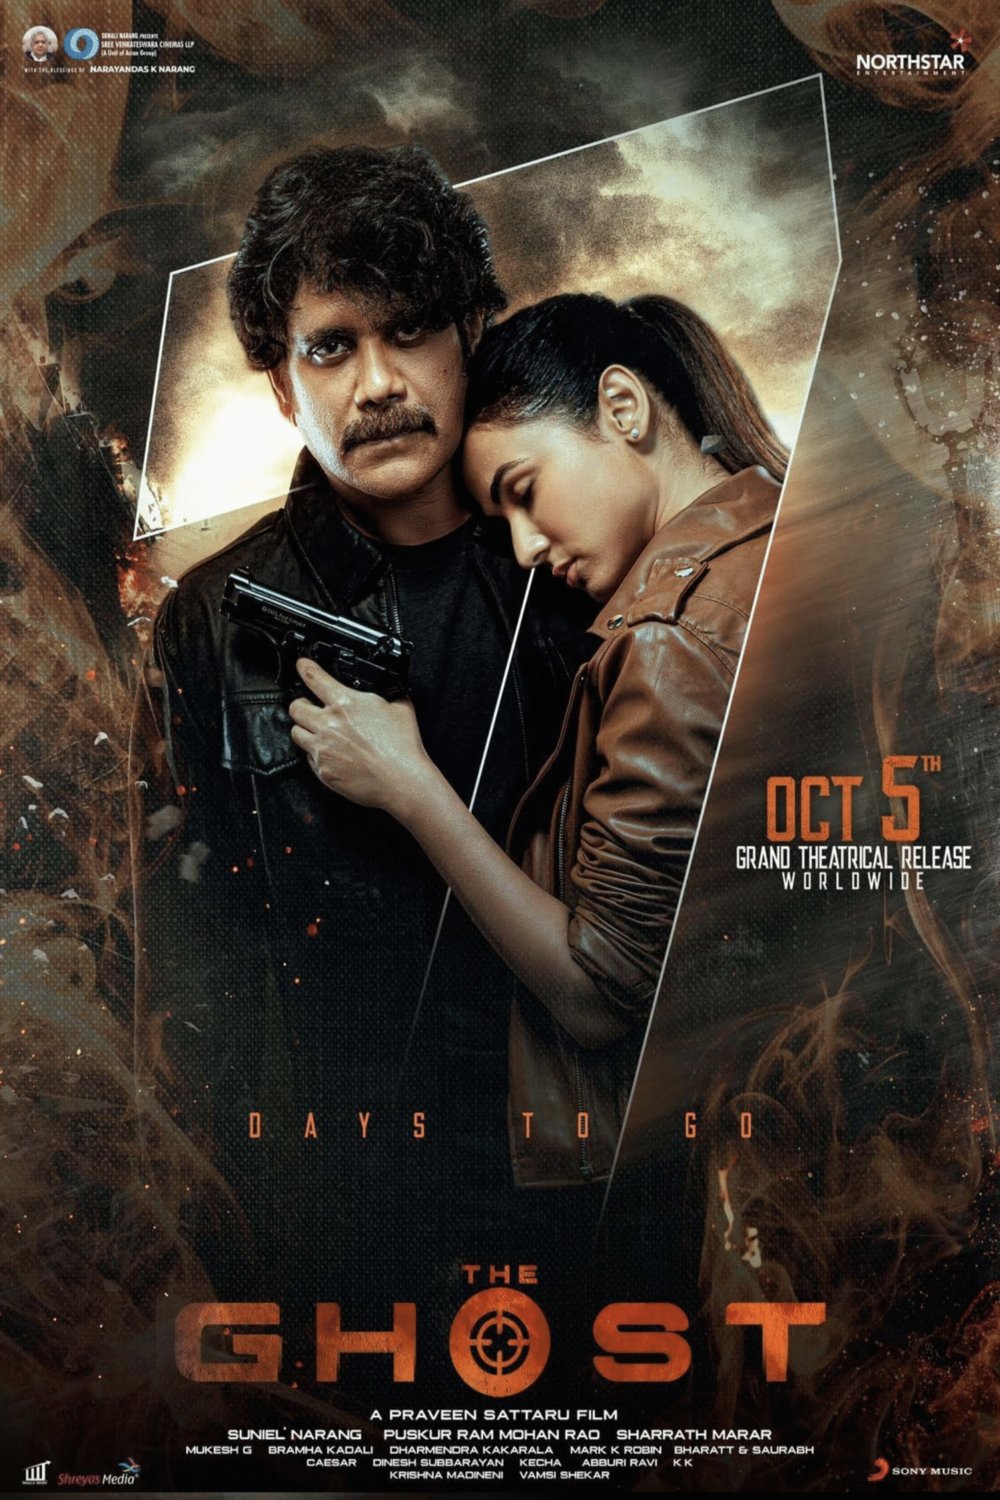 Telugu poster of the movie The Ghost